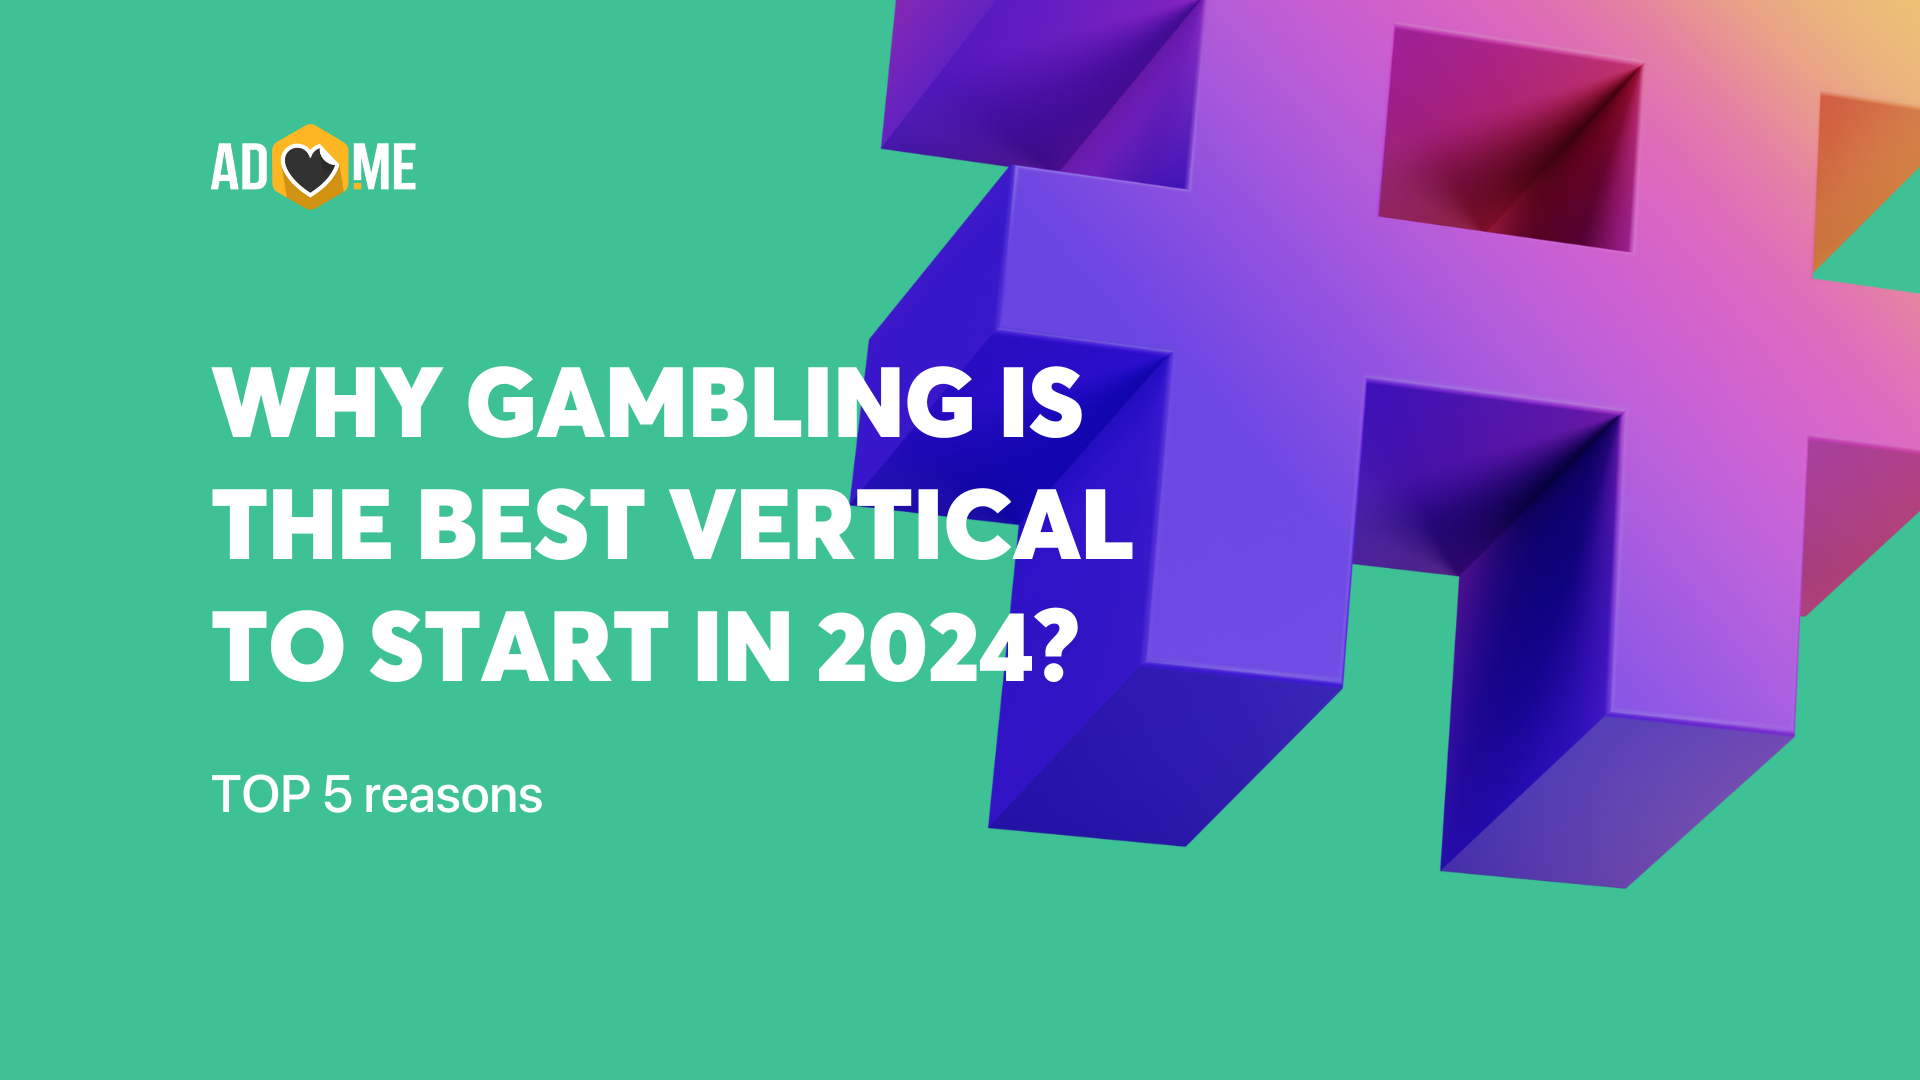 Why gambling is the best vertical to start in 2024? TOP 5 reasons